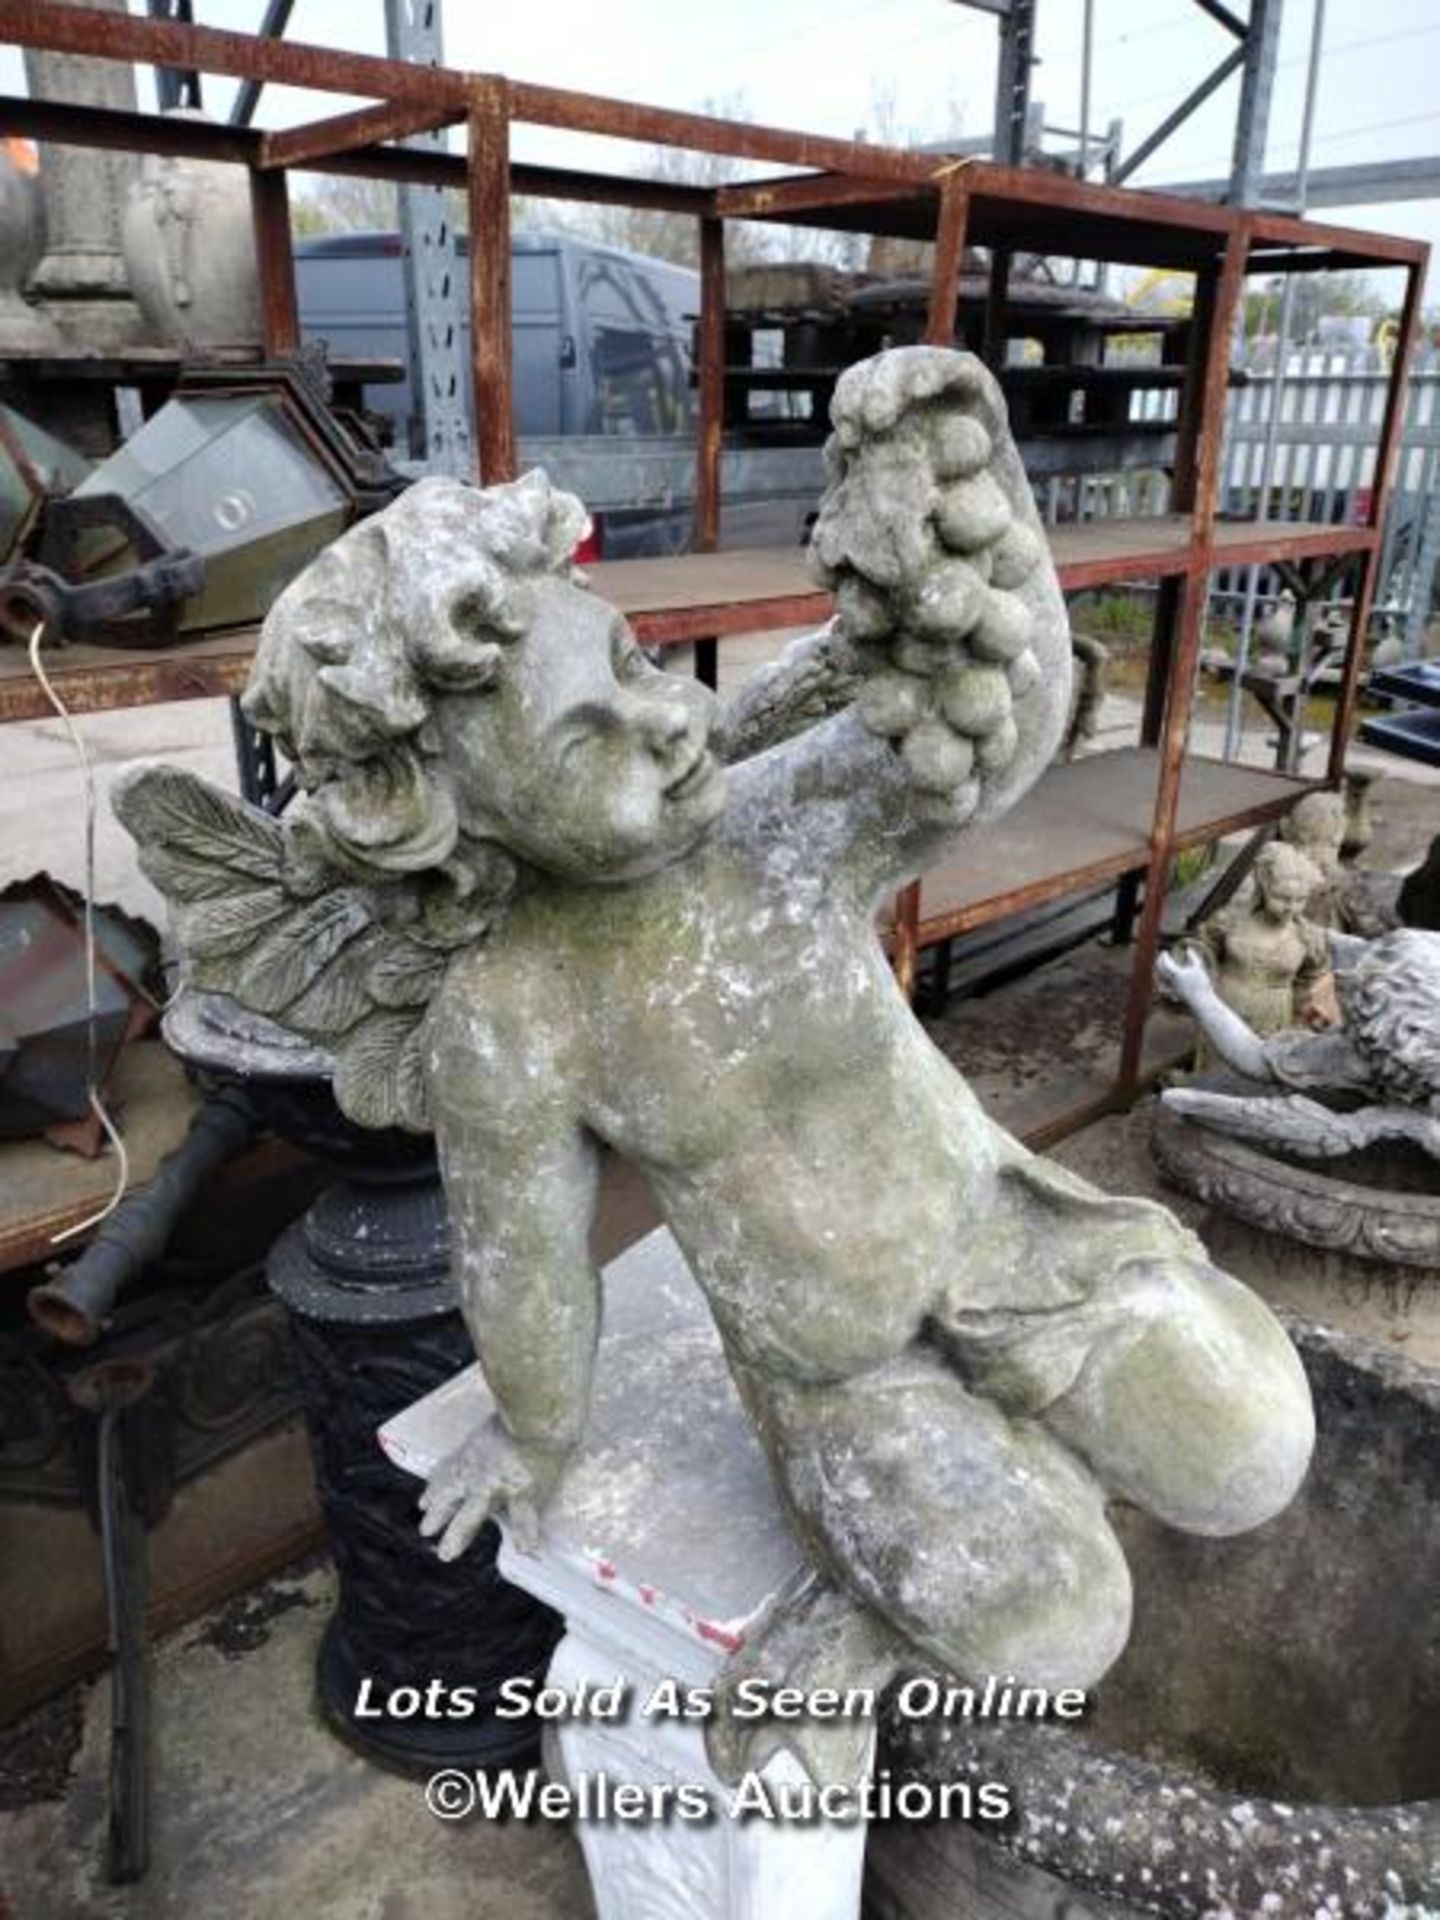 *RECONSTITUTED STONE AND FIBREGLASS CHERUB STATUE, 52CM (H) X 60CM (L), SOME CRACKS AND CHIPS